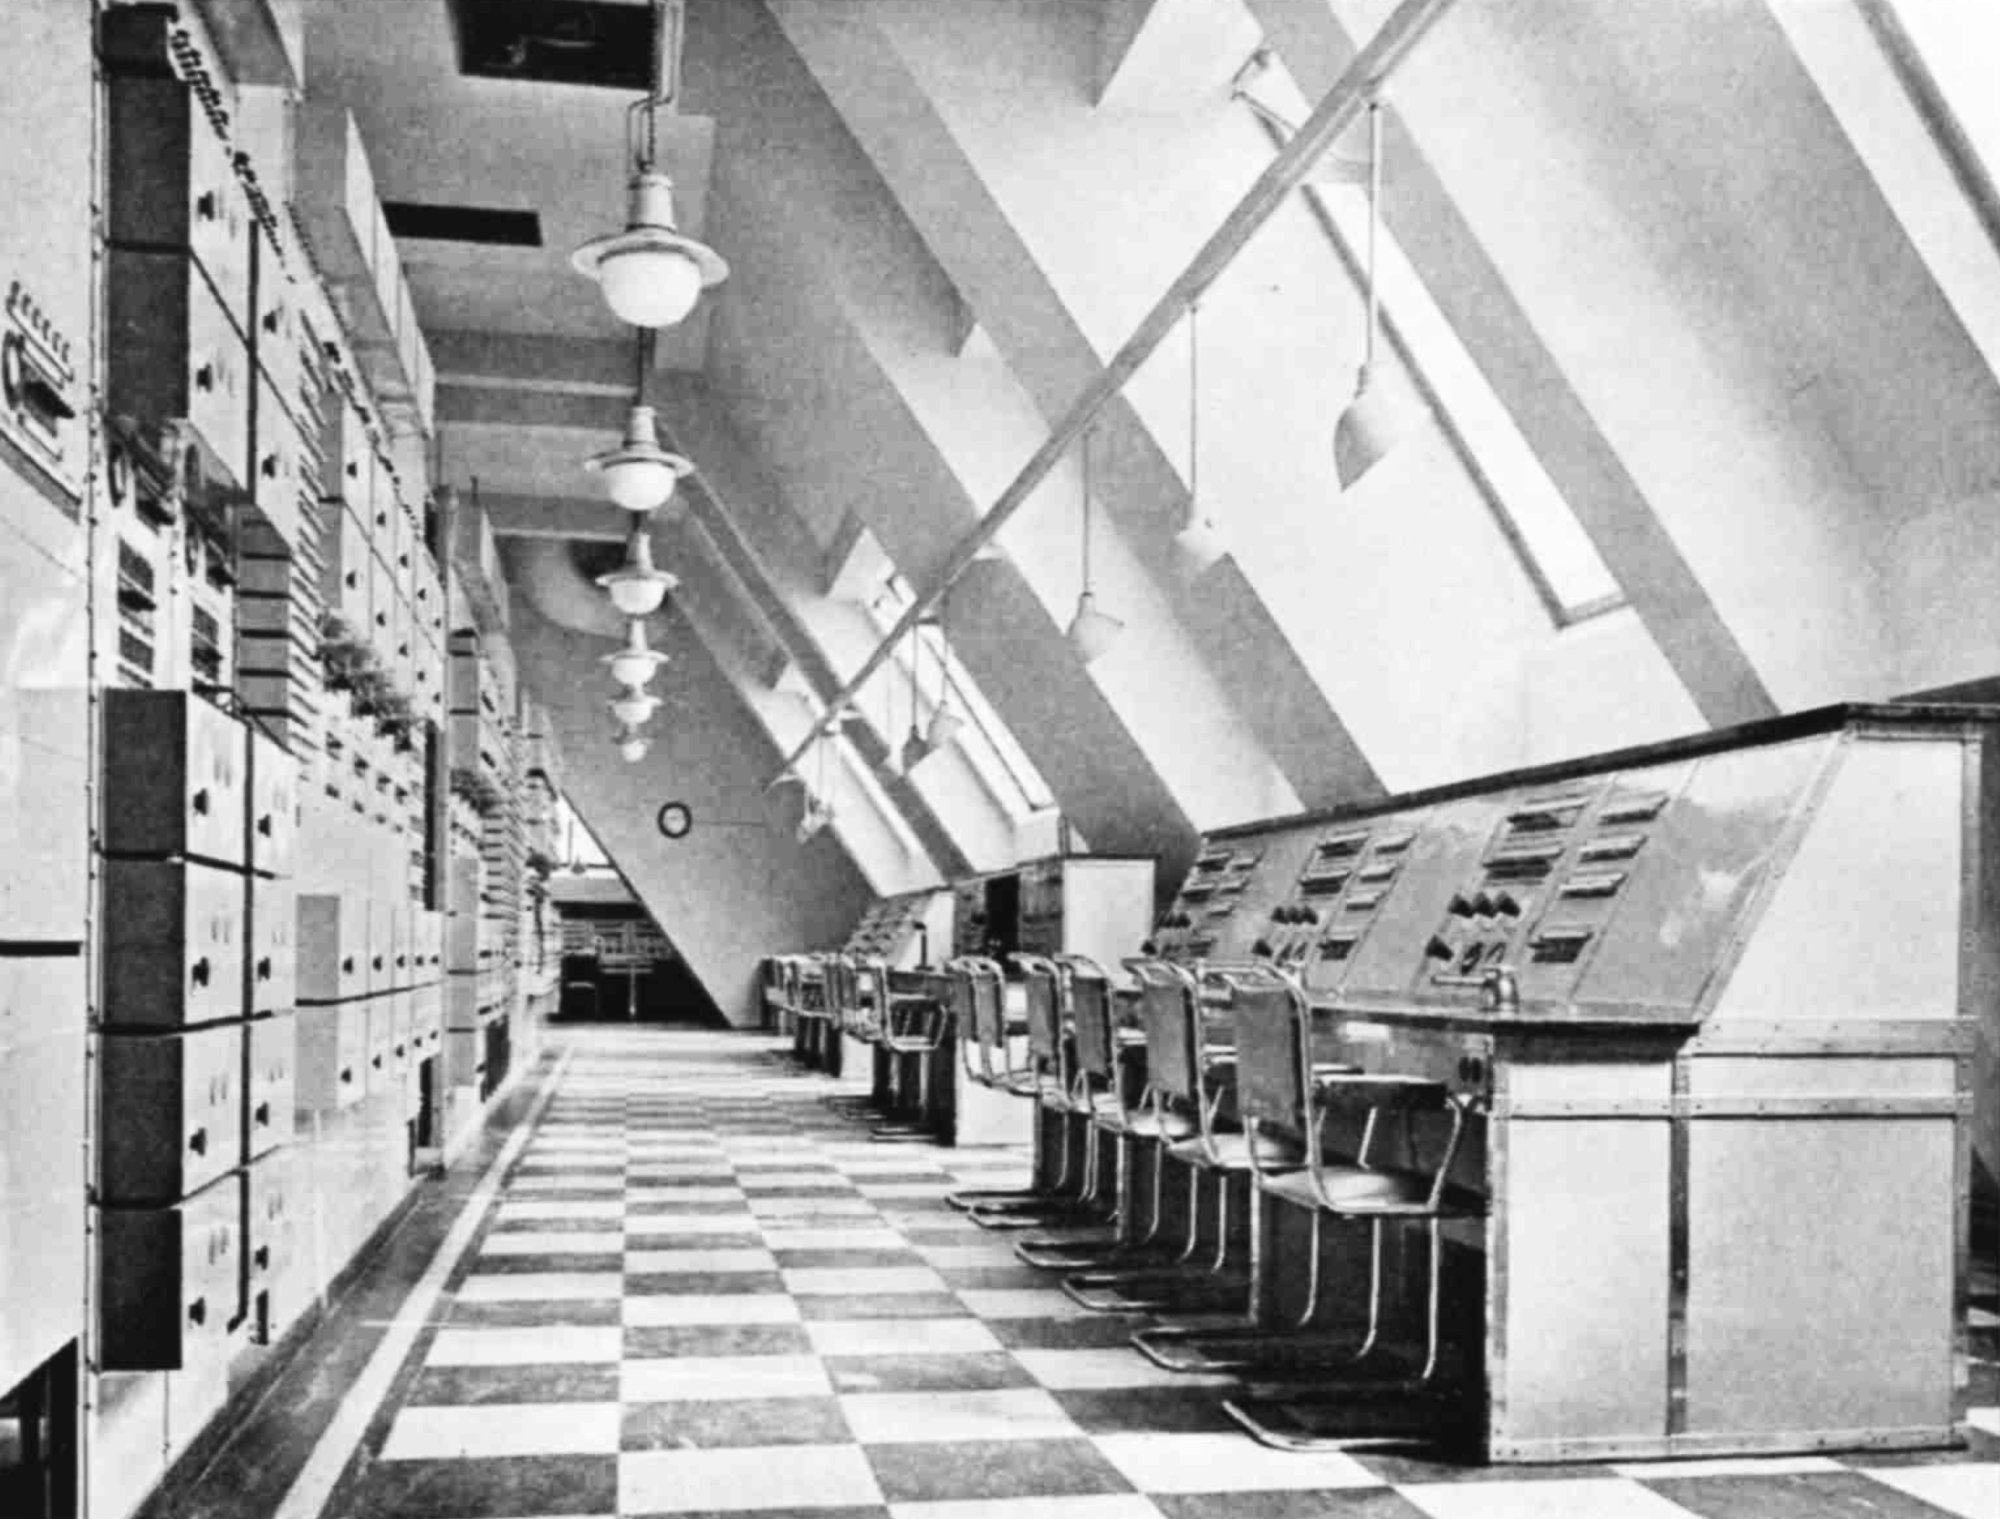 Looking down a long corridor with desks on the right and machinery lining the left